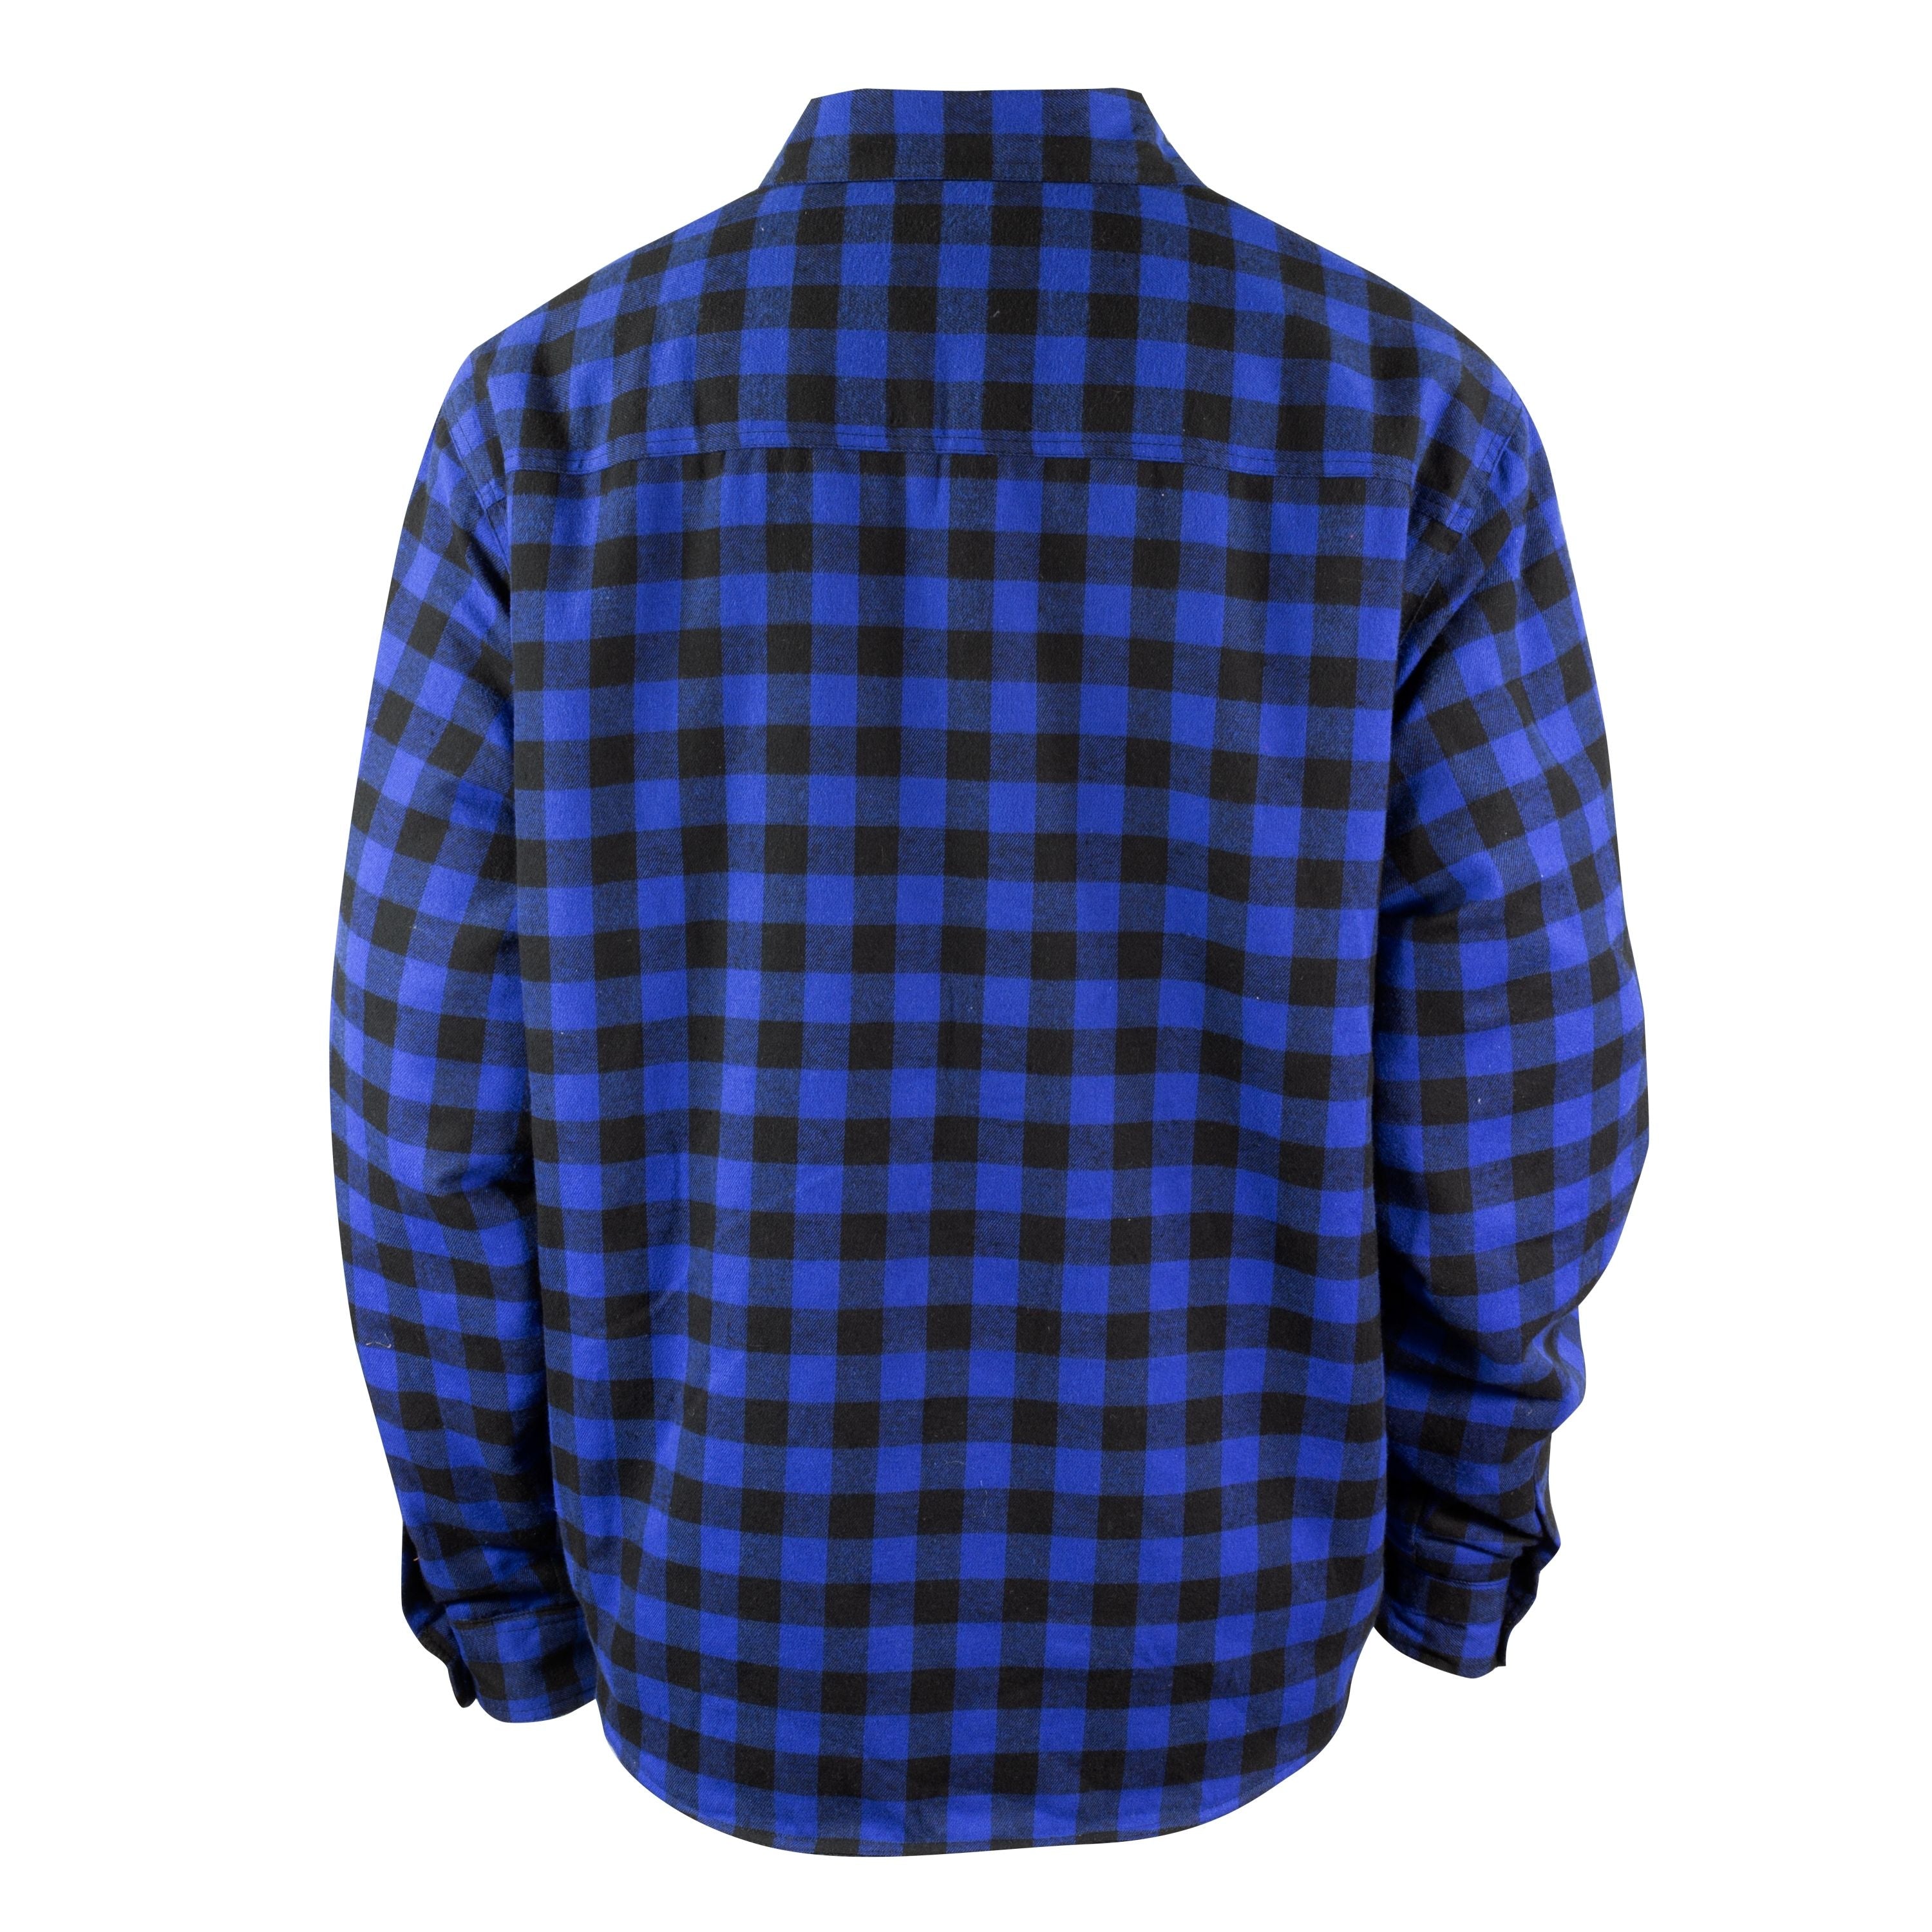 Flannel shirt with sherpa lining - Men’s